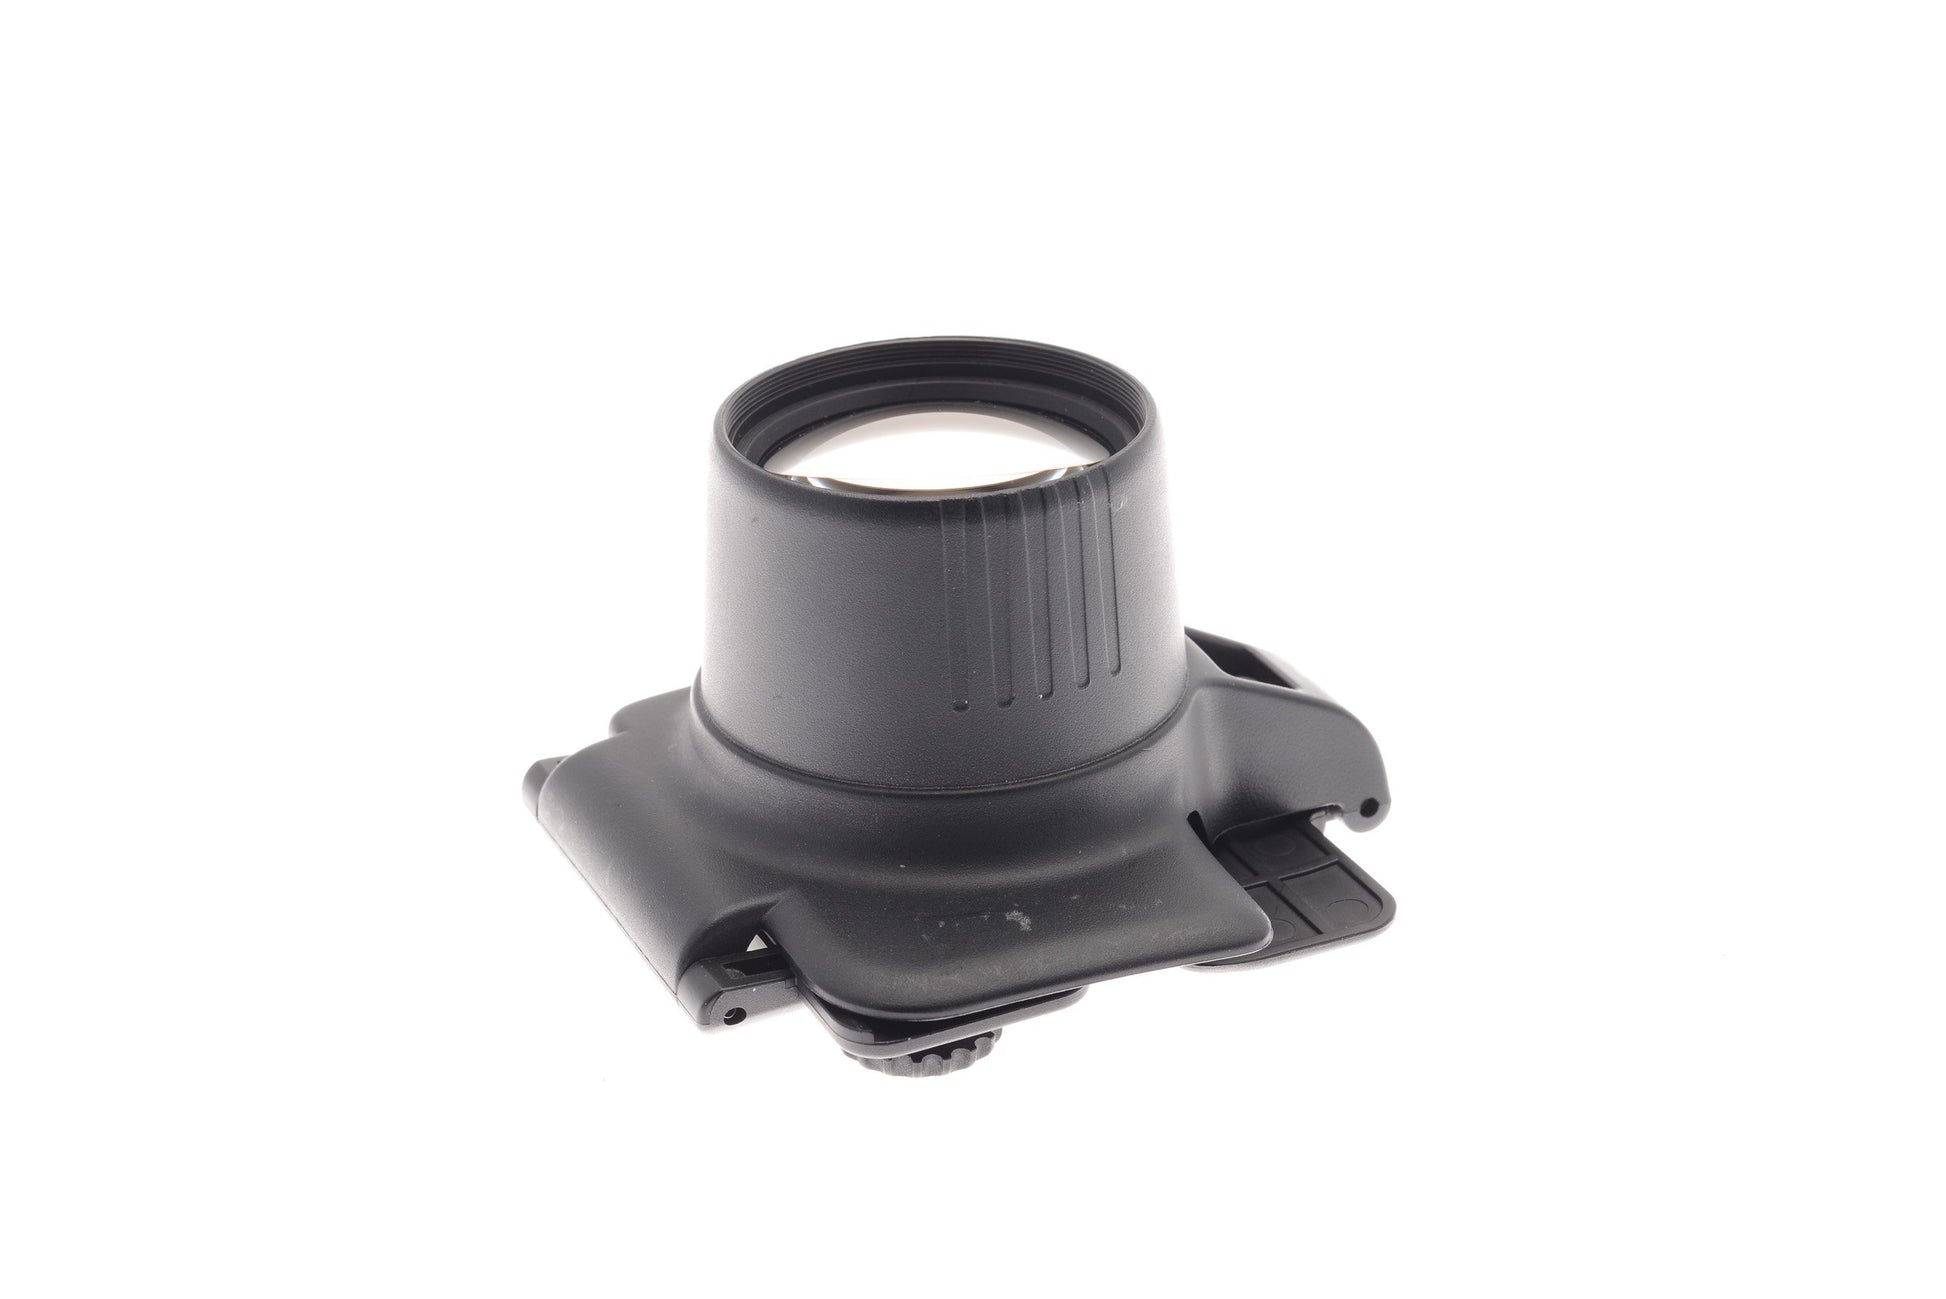 Canon AF Telephoto Converter - Accessory